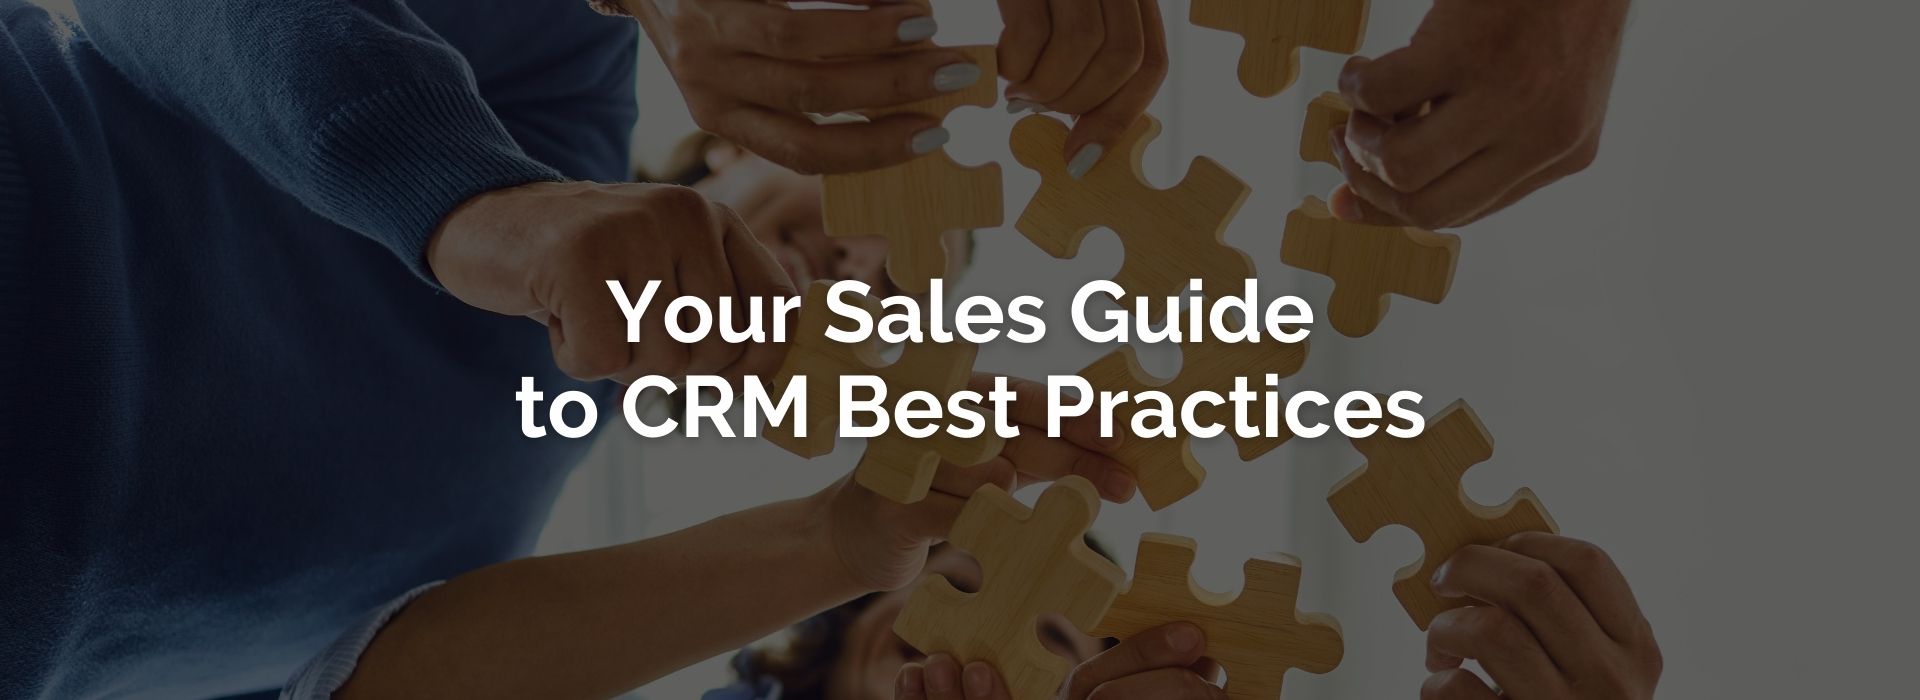 YOUR SALES GUIDE TO CRM BEST PRACTICES